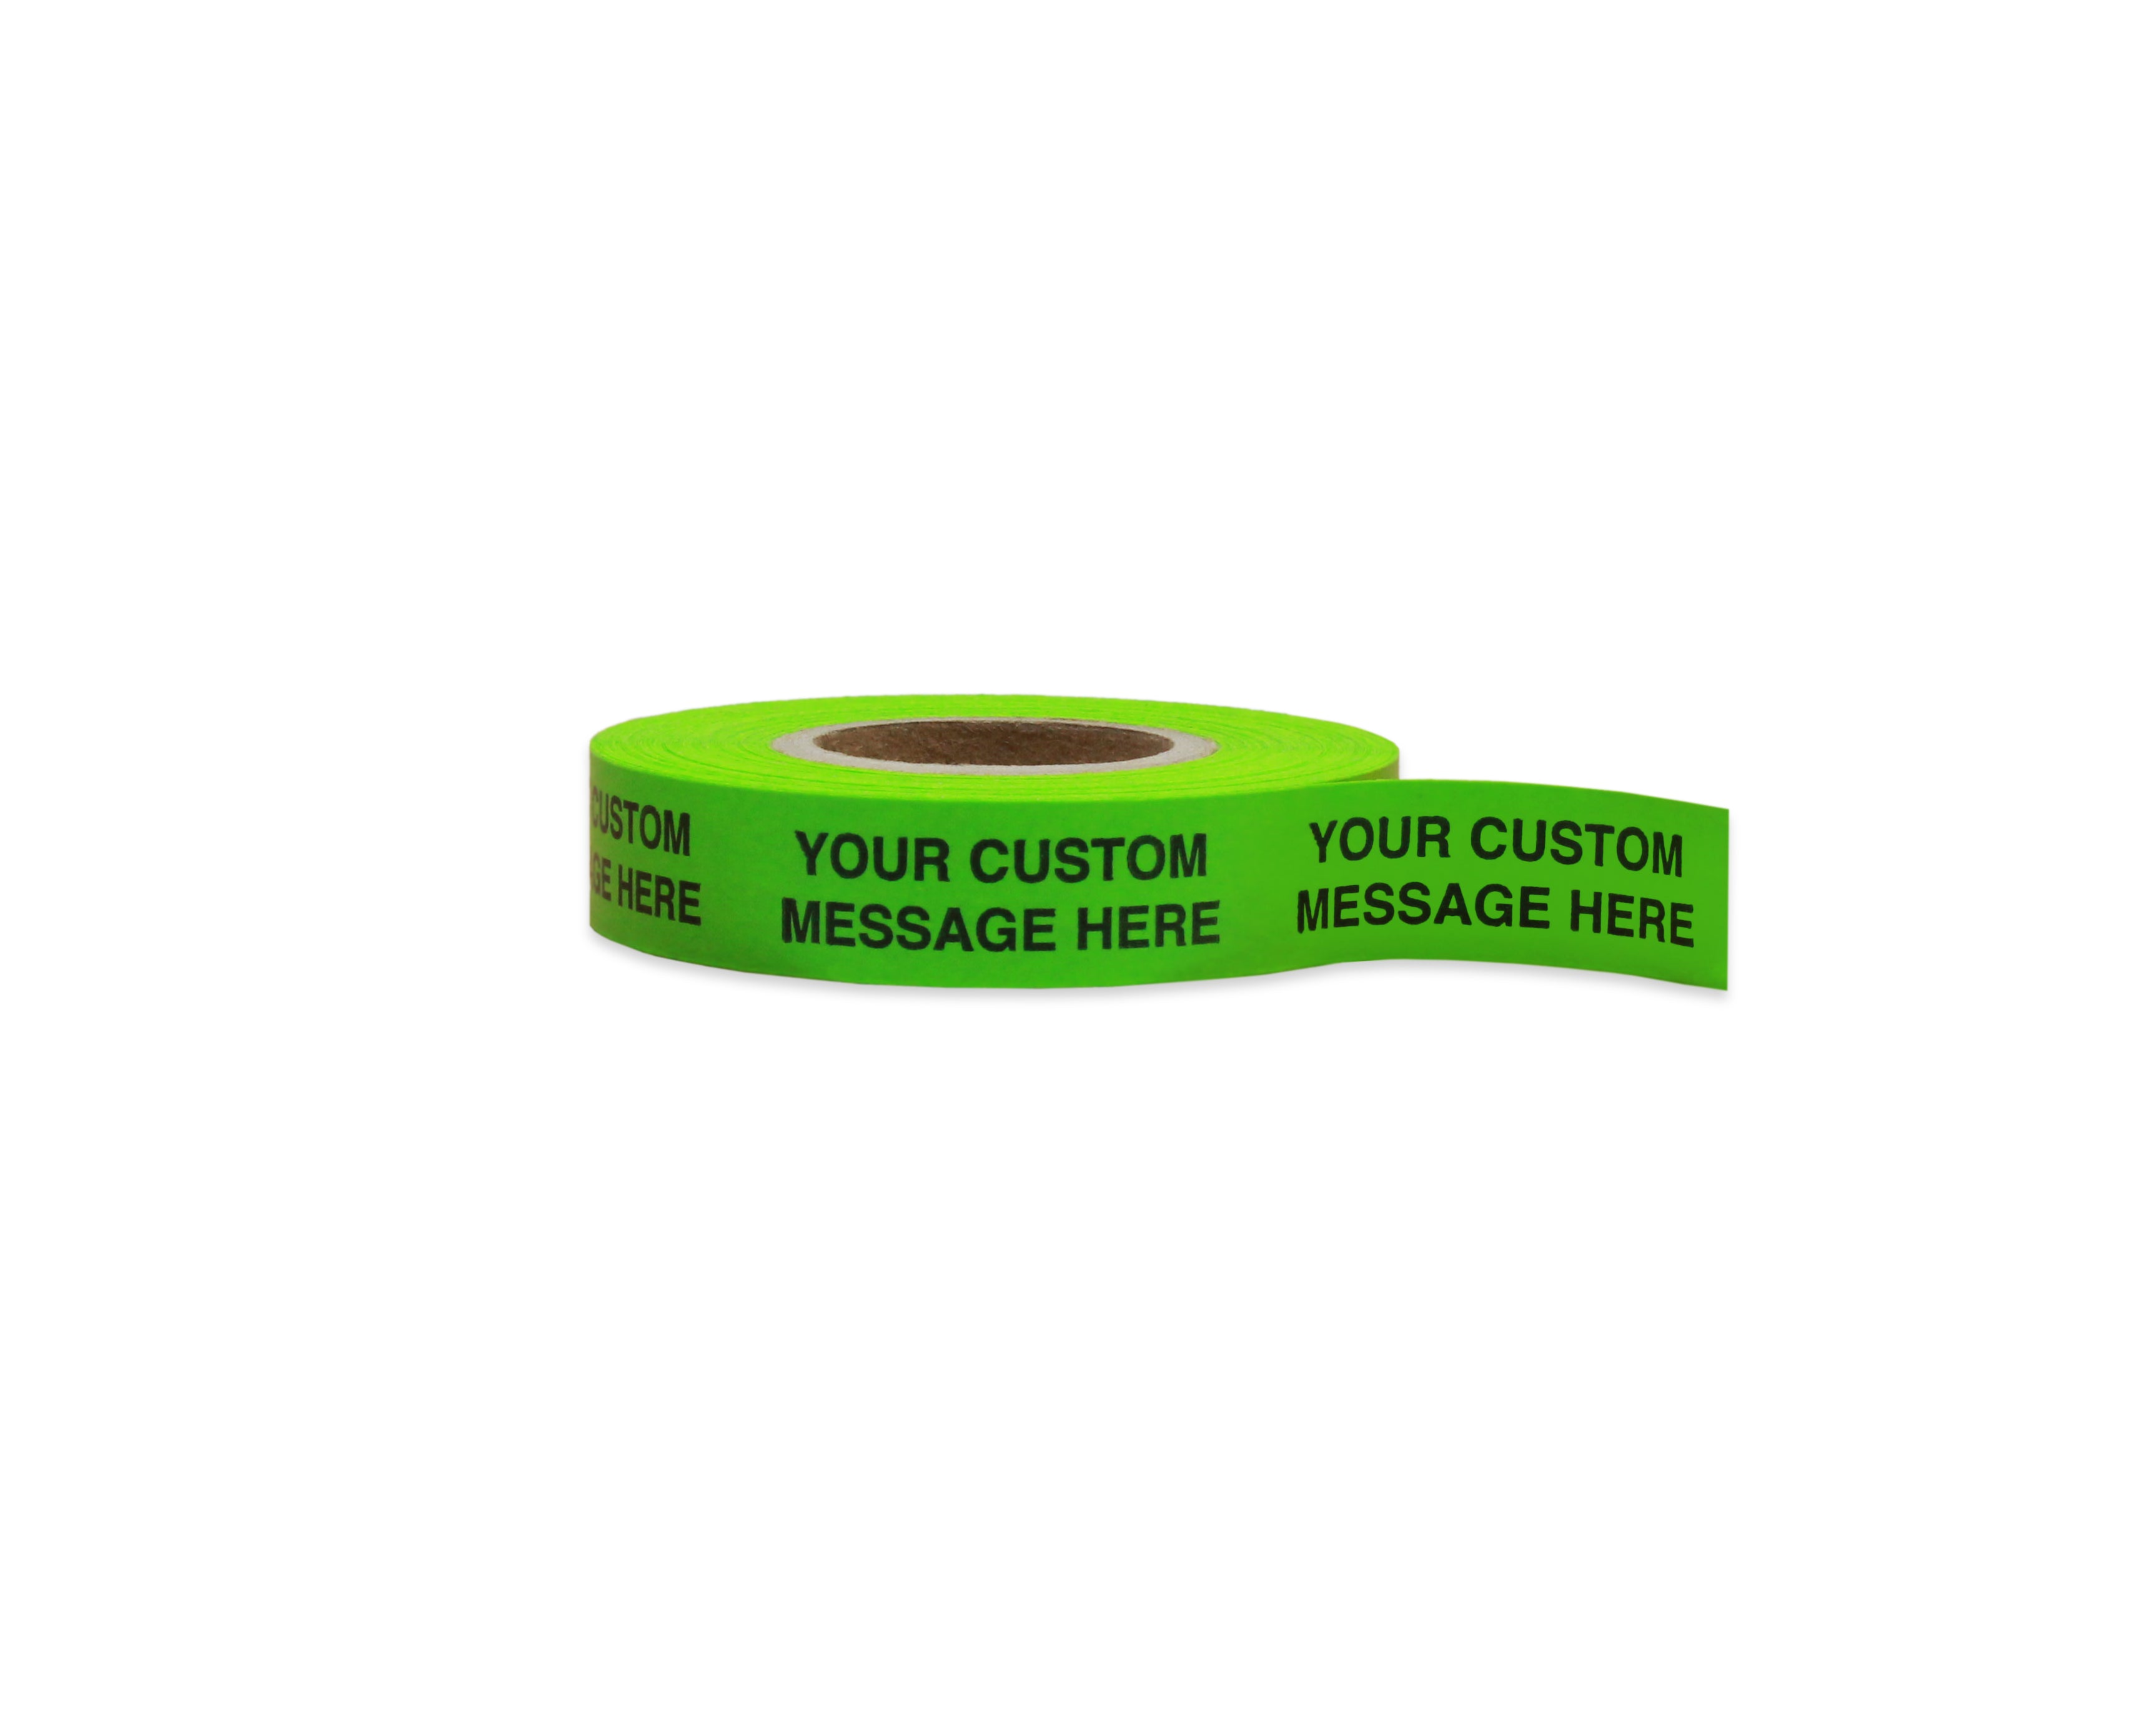 Custom Imprinted Adhesive Tape with Your Message: 1/2 x 500